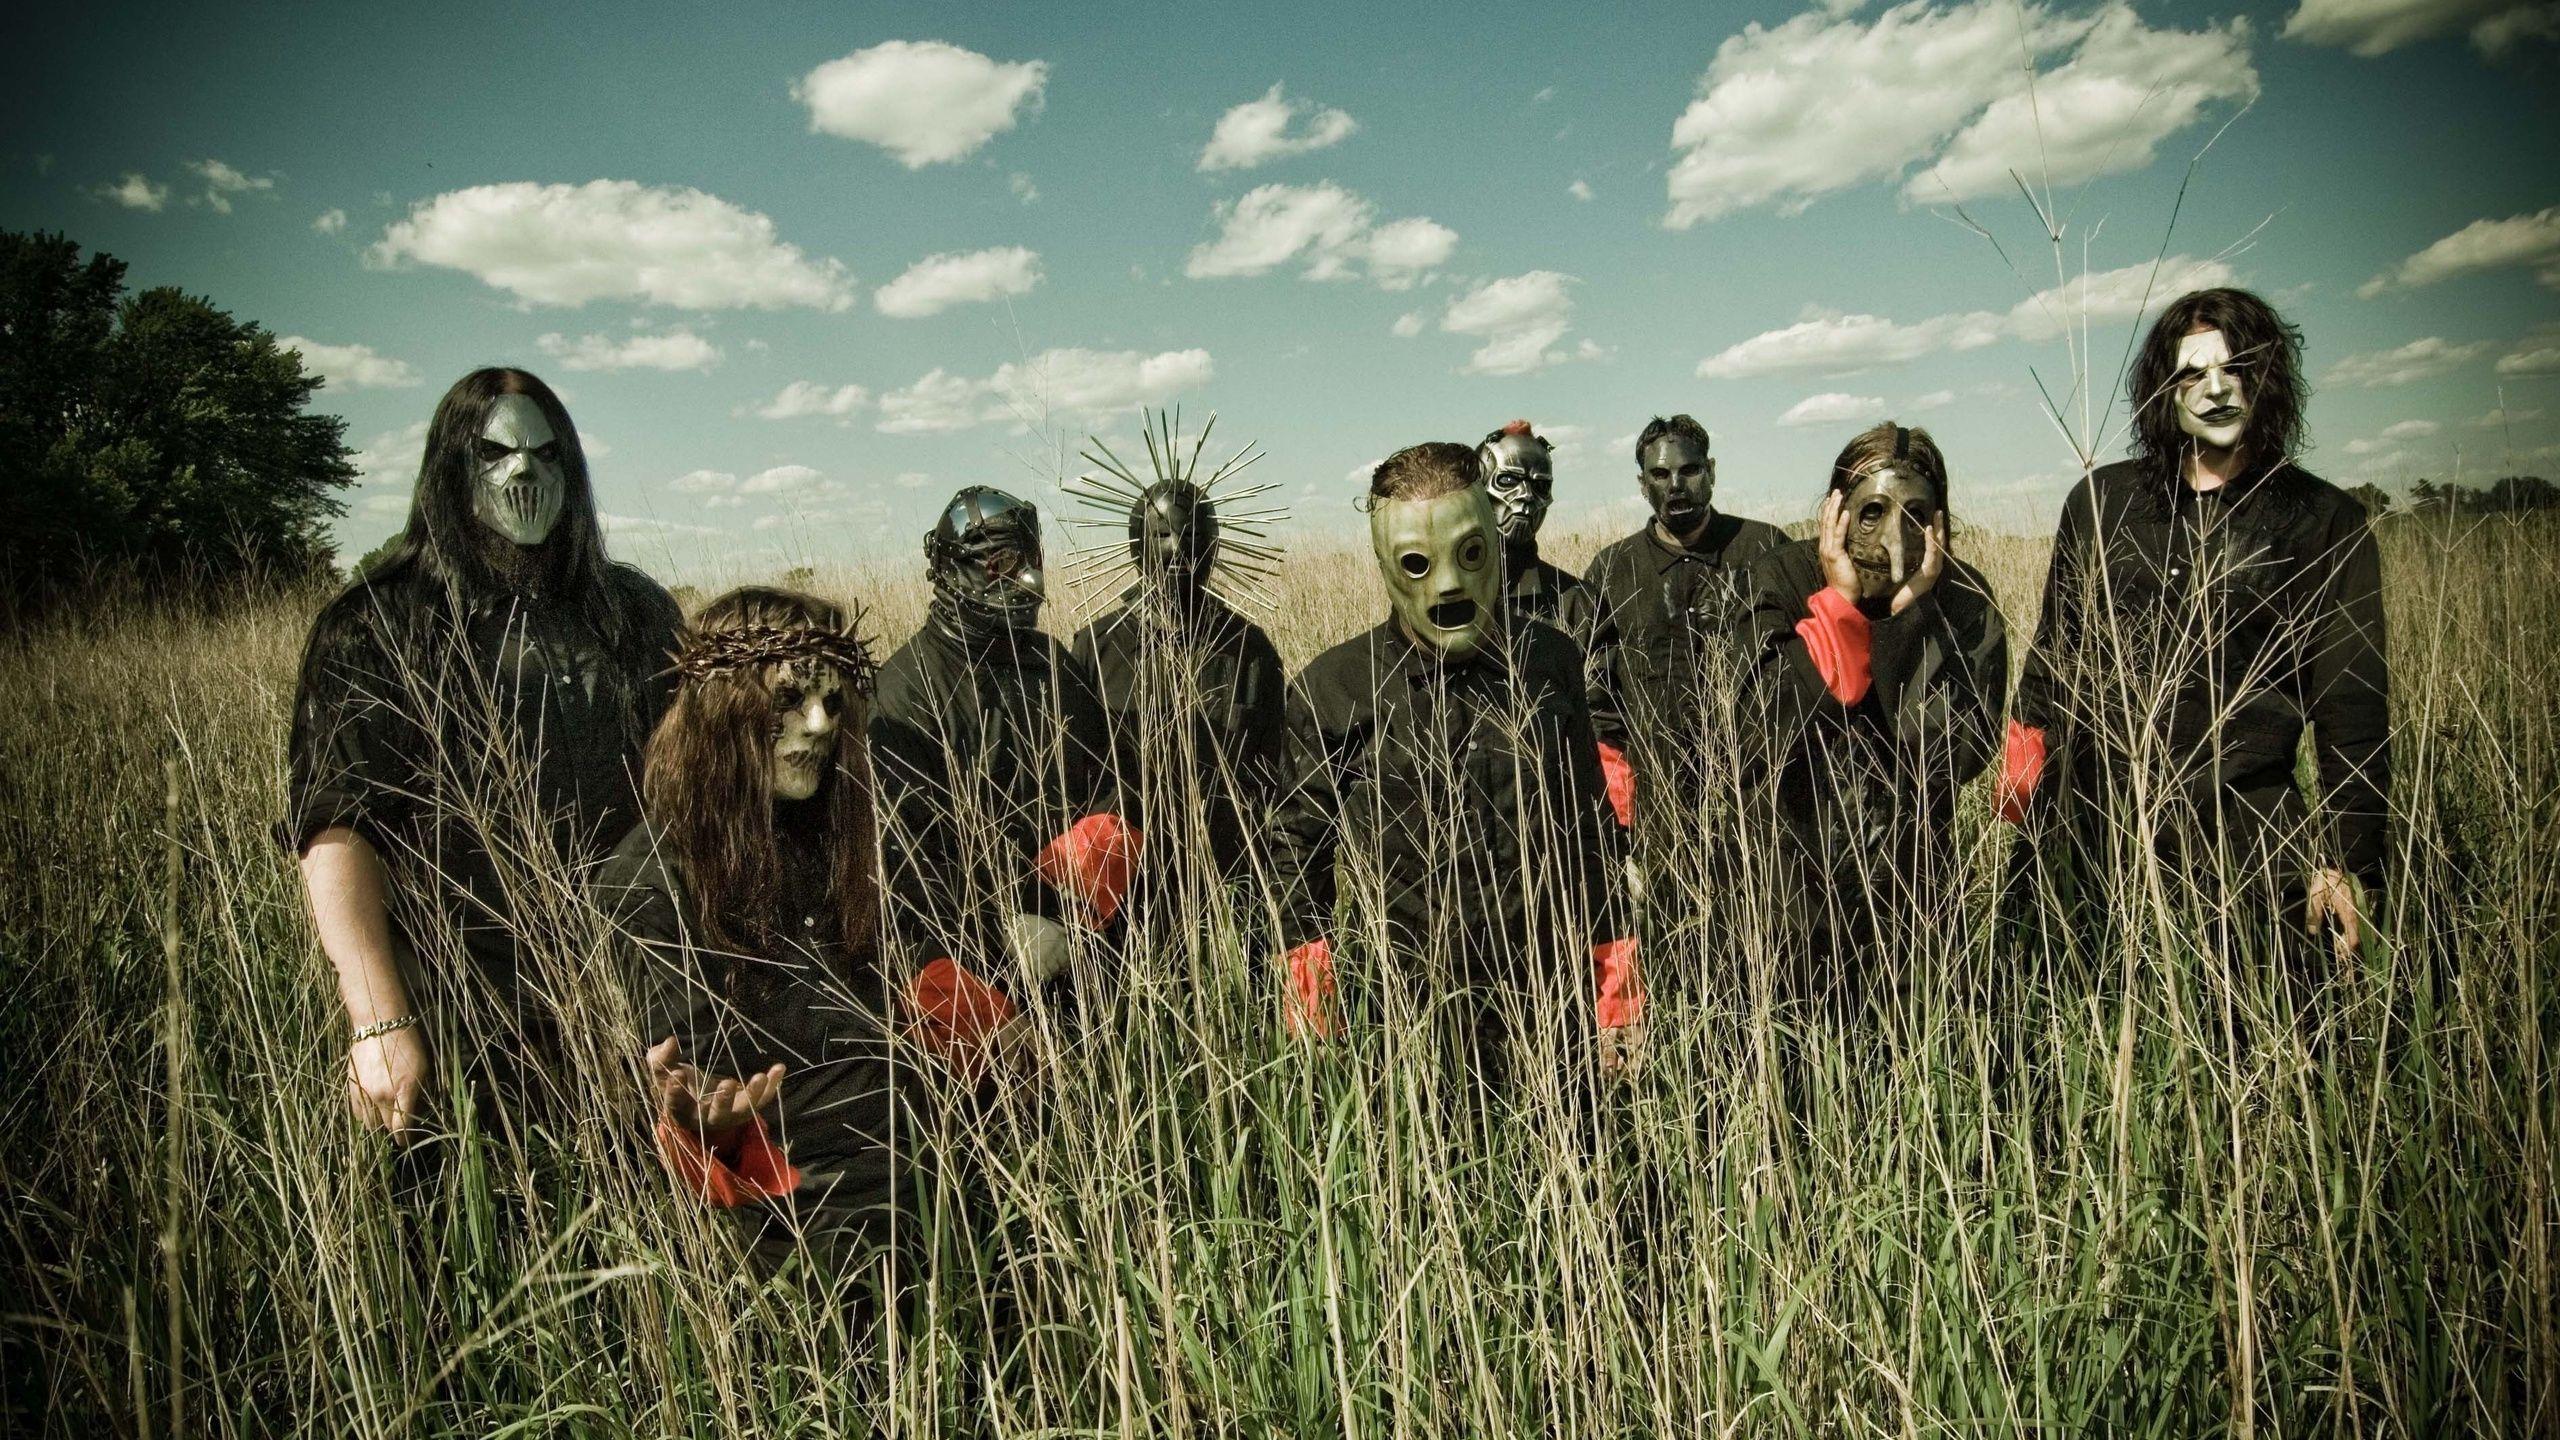 Group, The Sky In The Background, Team, Slipknot